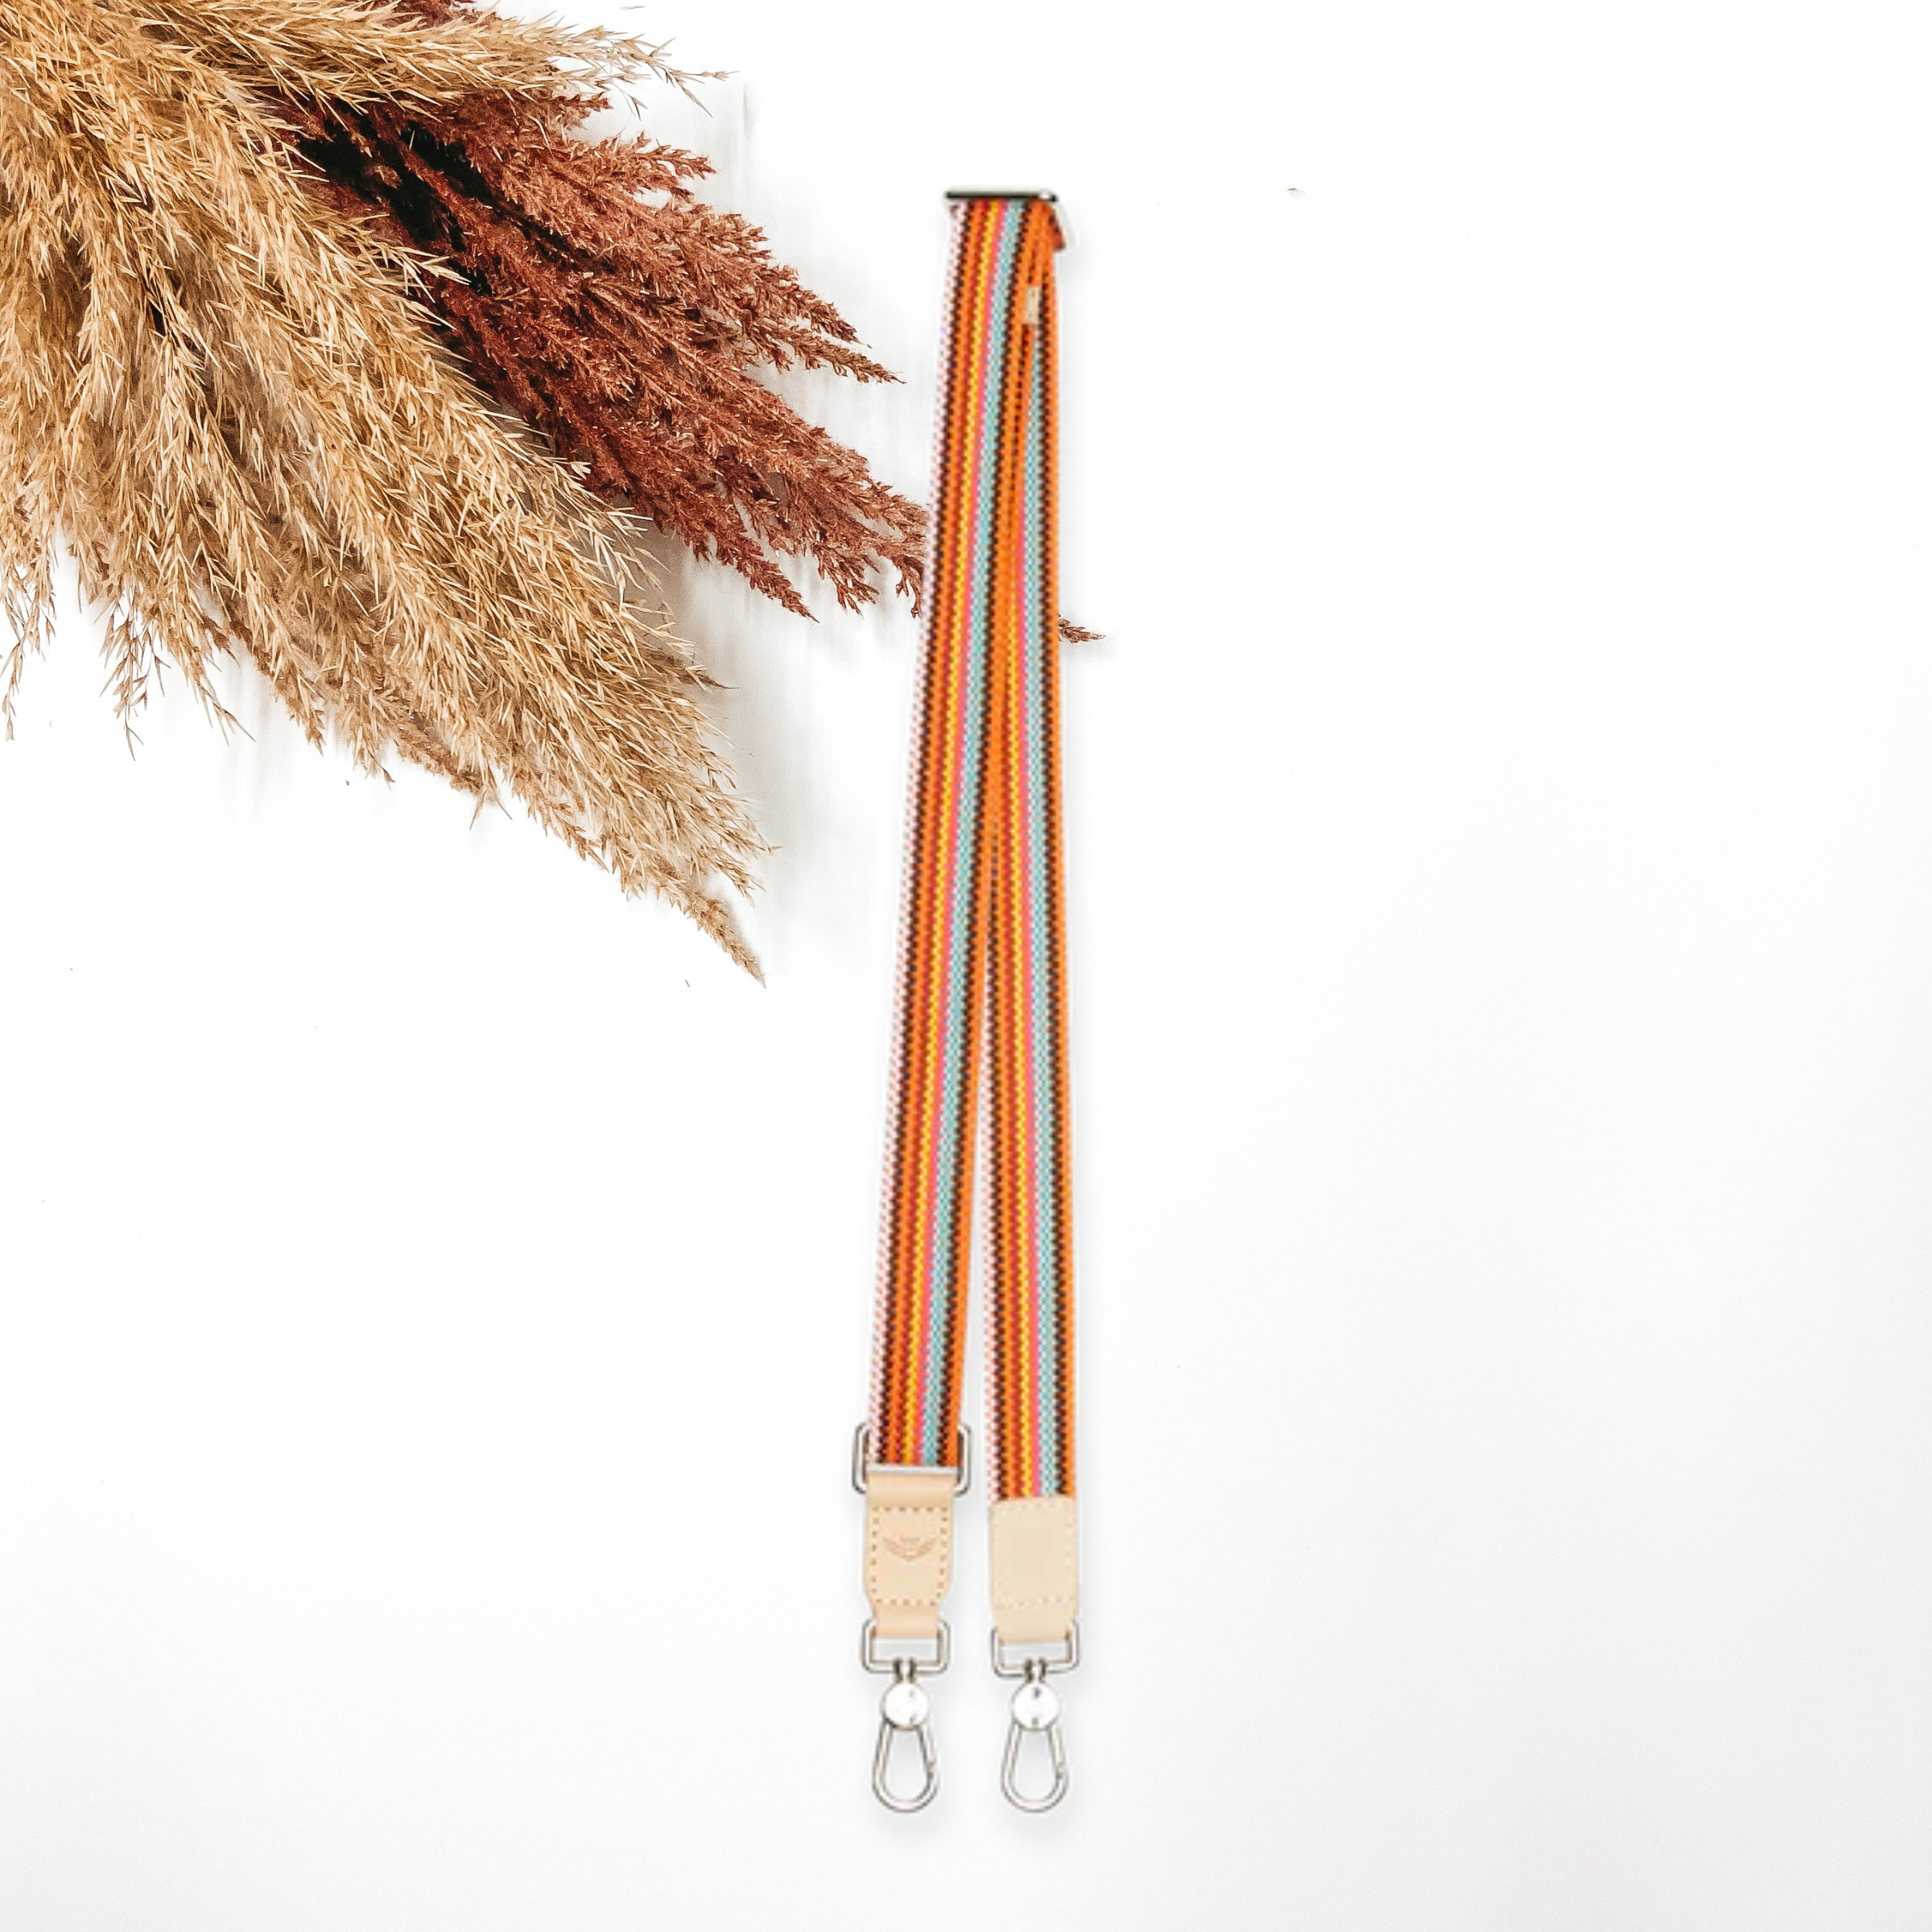 A woven multicolored purse strap that has a main color of orange. This purse strap is pictured on a white background with tan and brown pompous grass in the top left corner.